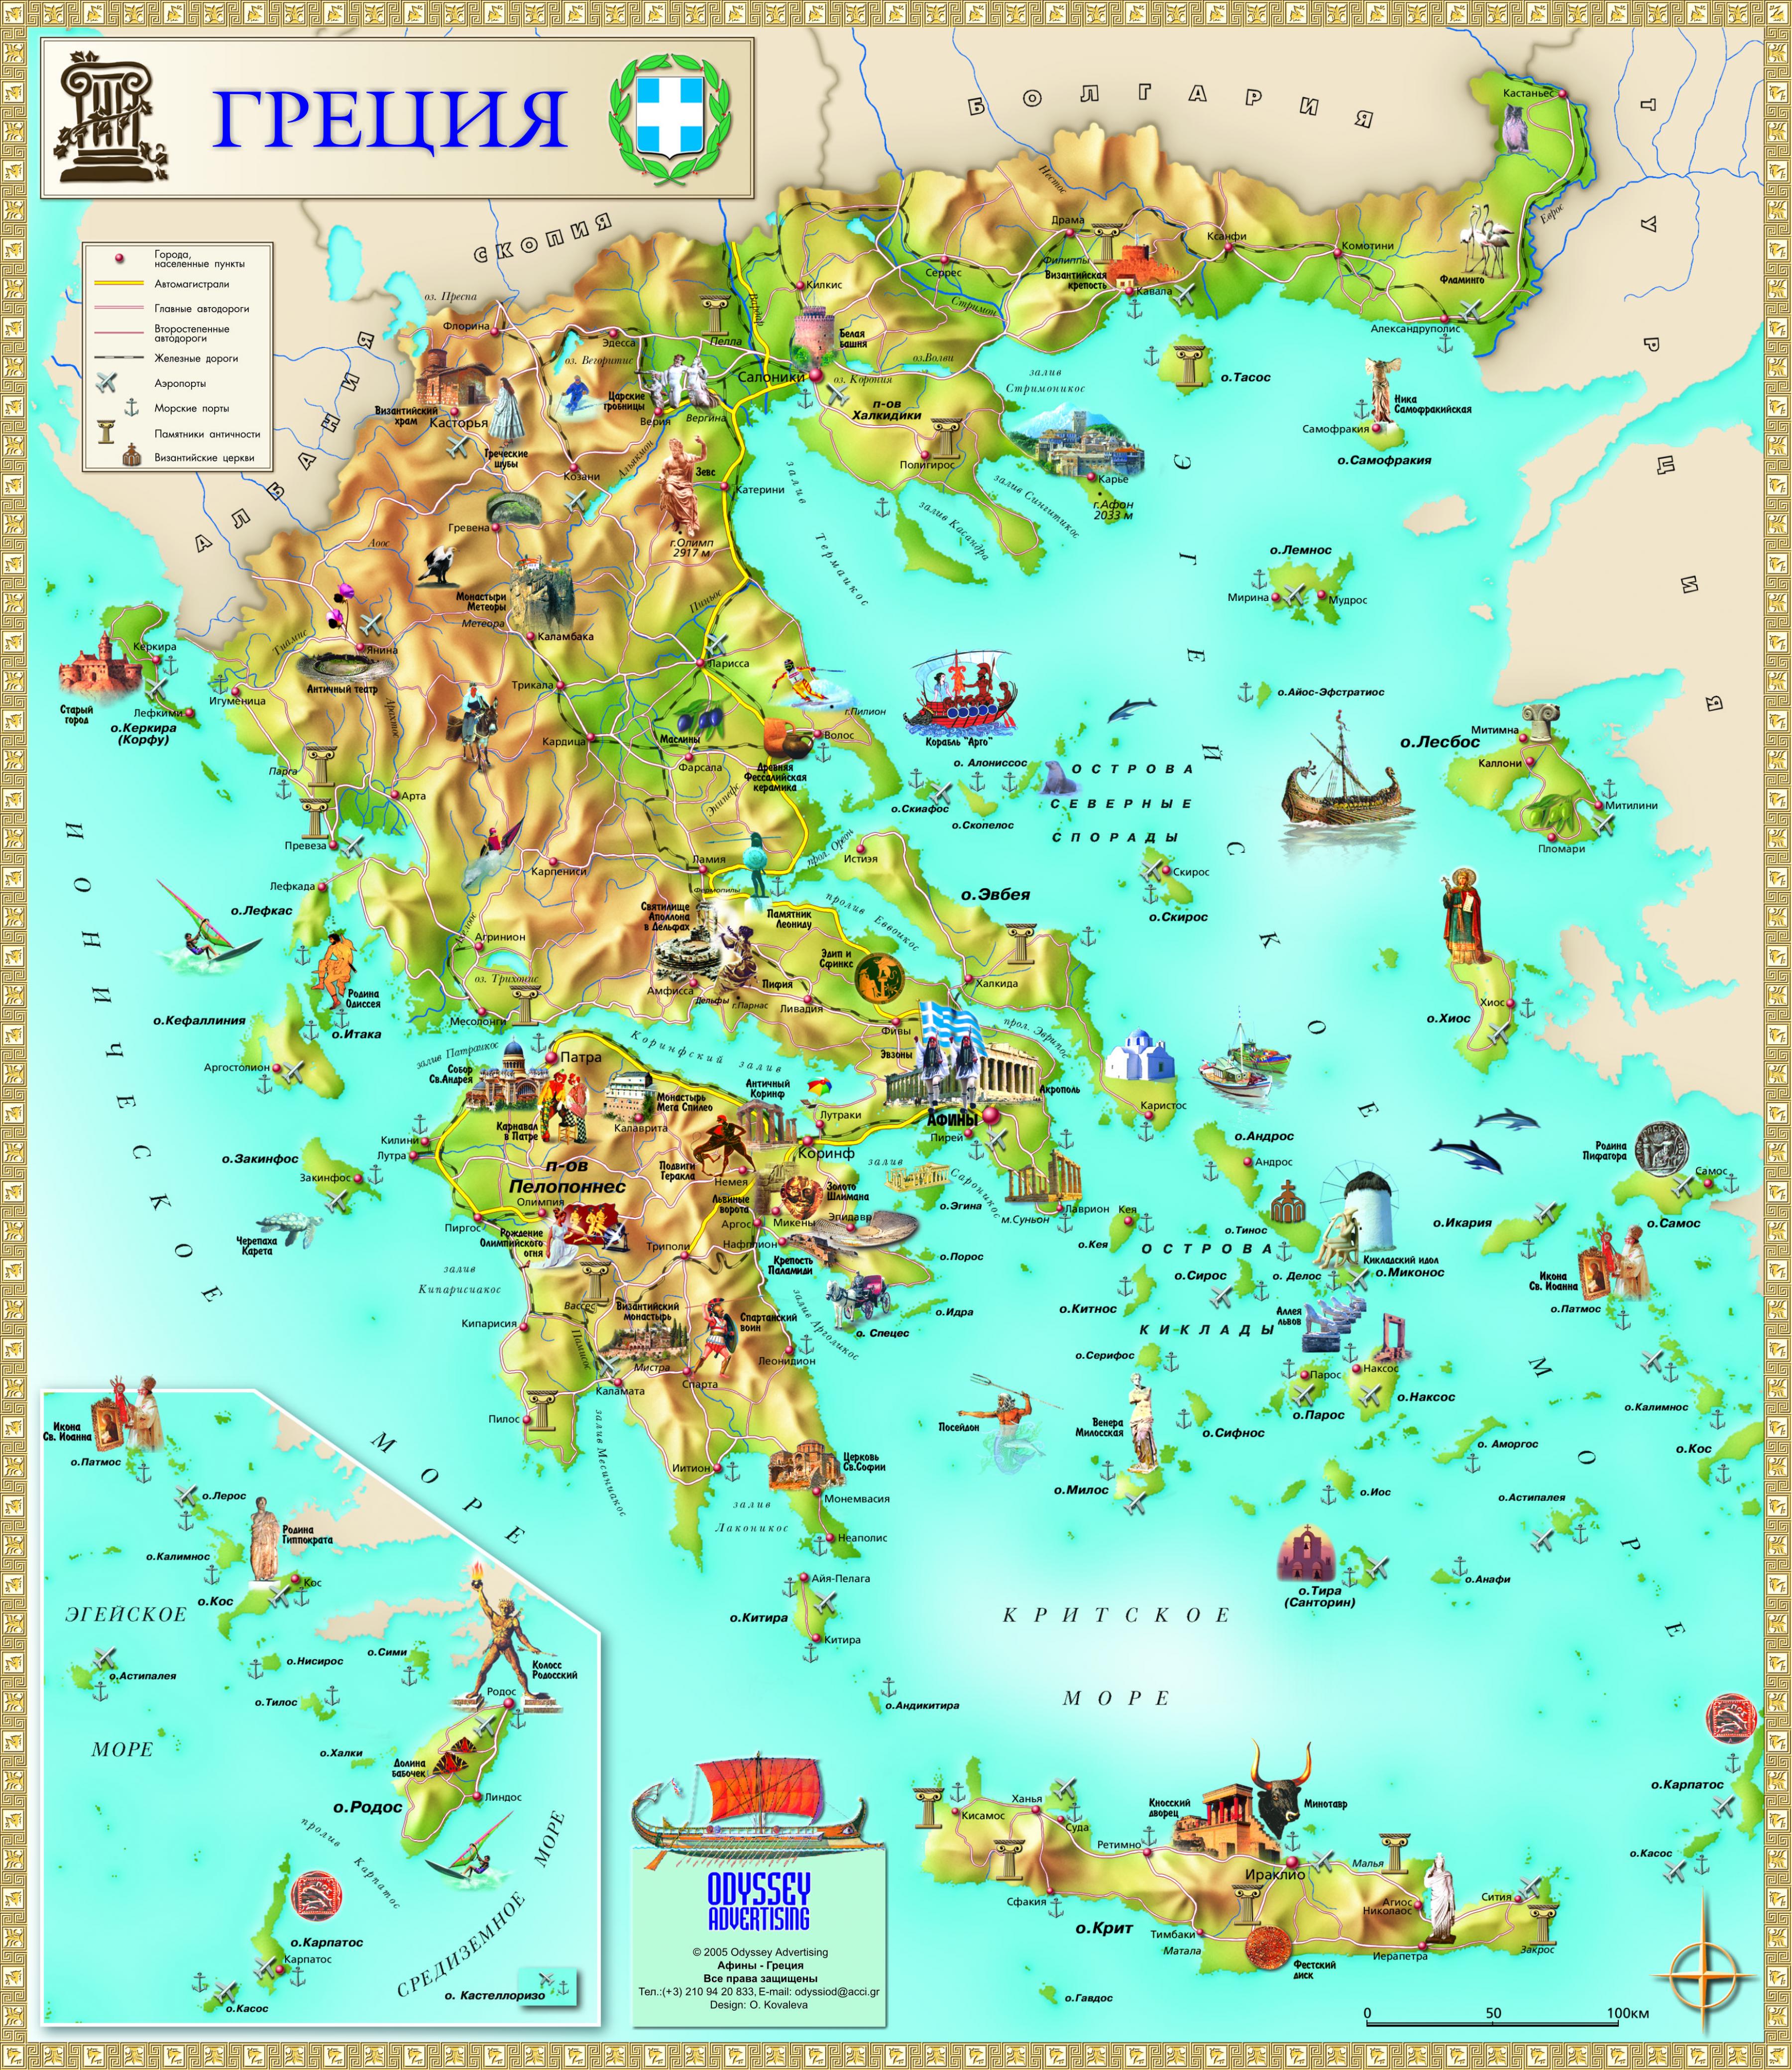 map of tourist attractions in greece